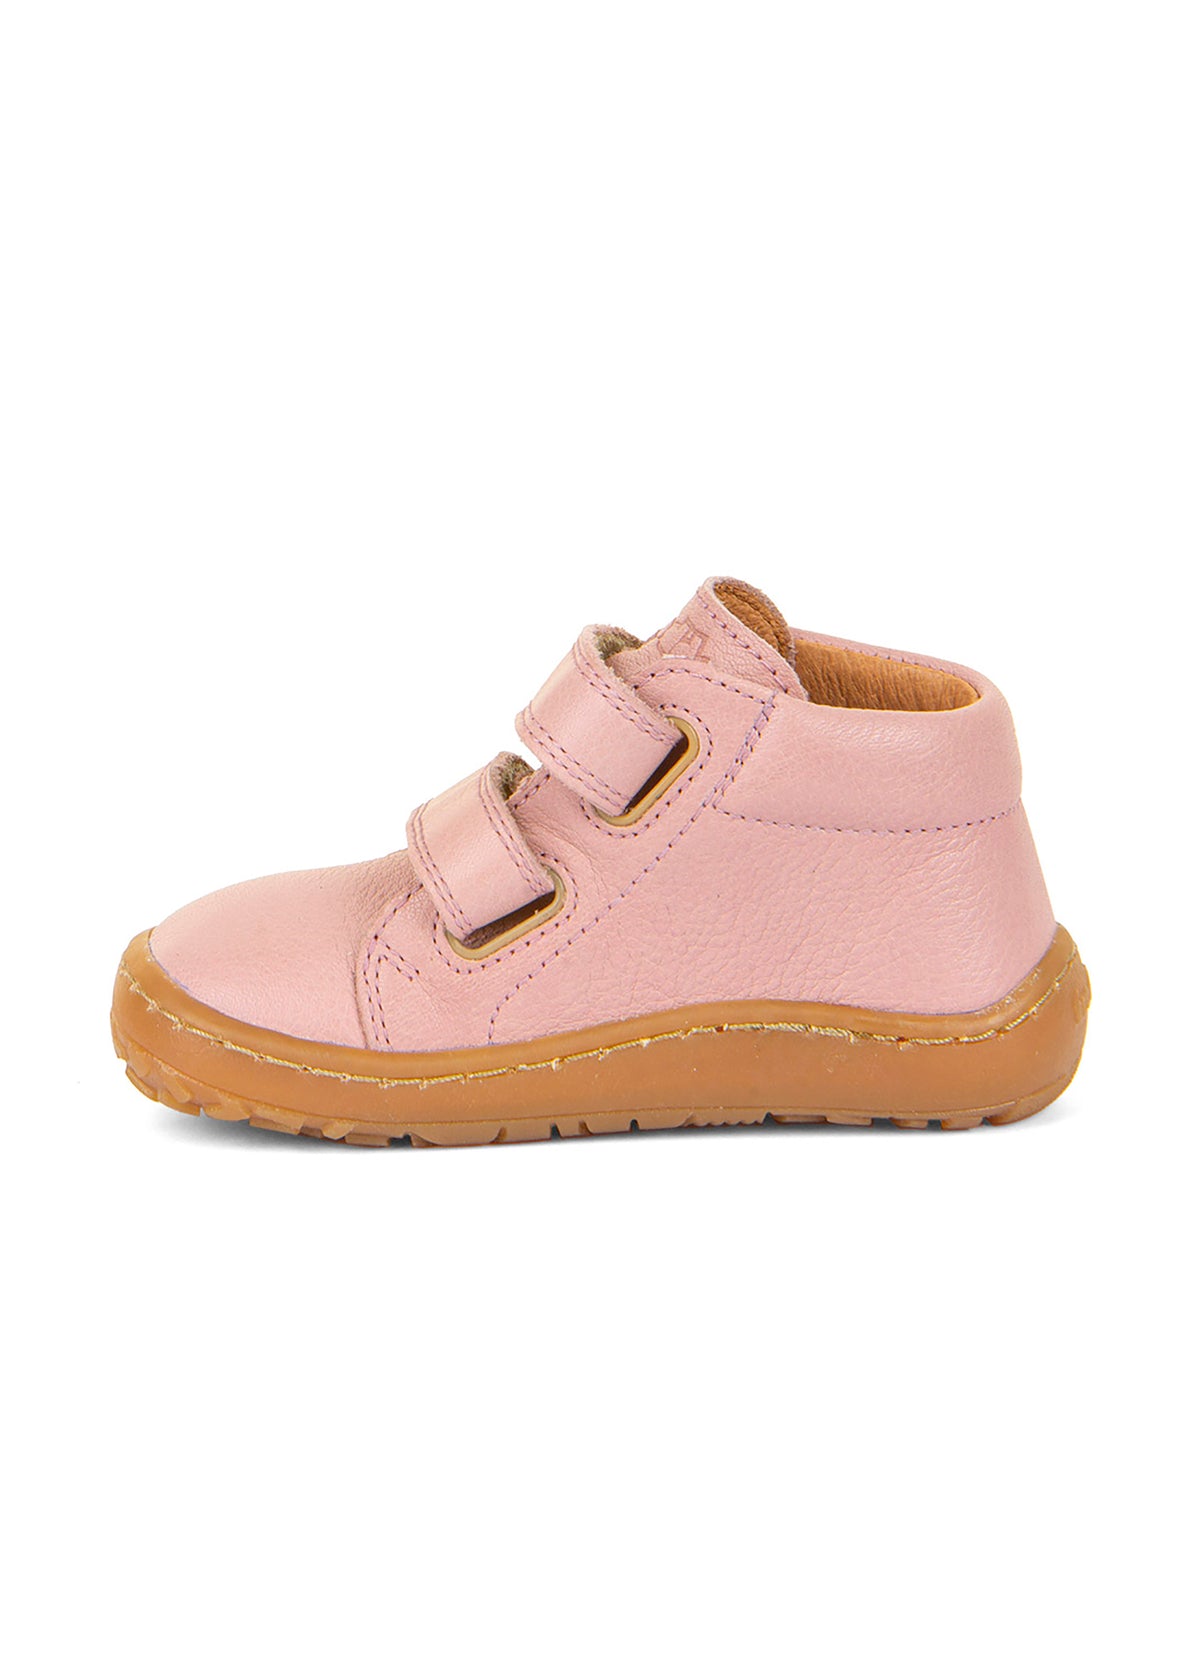 Children's barefoot shoes - pink leather, Barefoot First Step